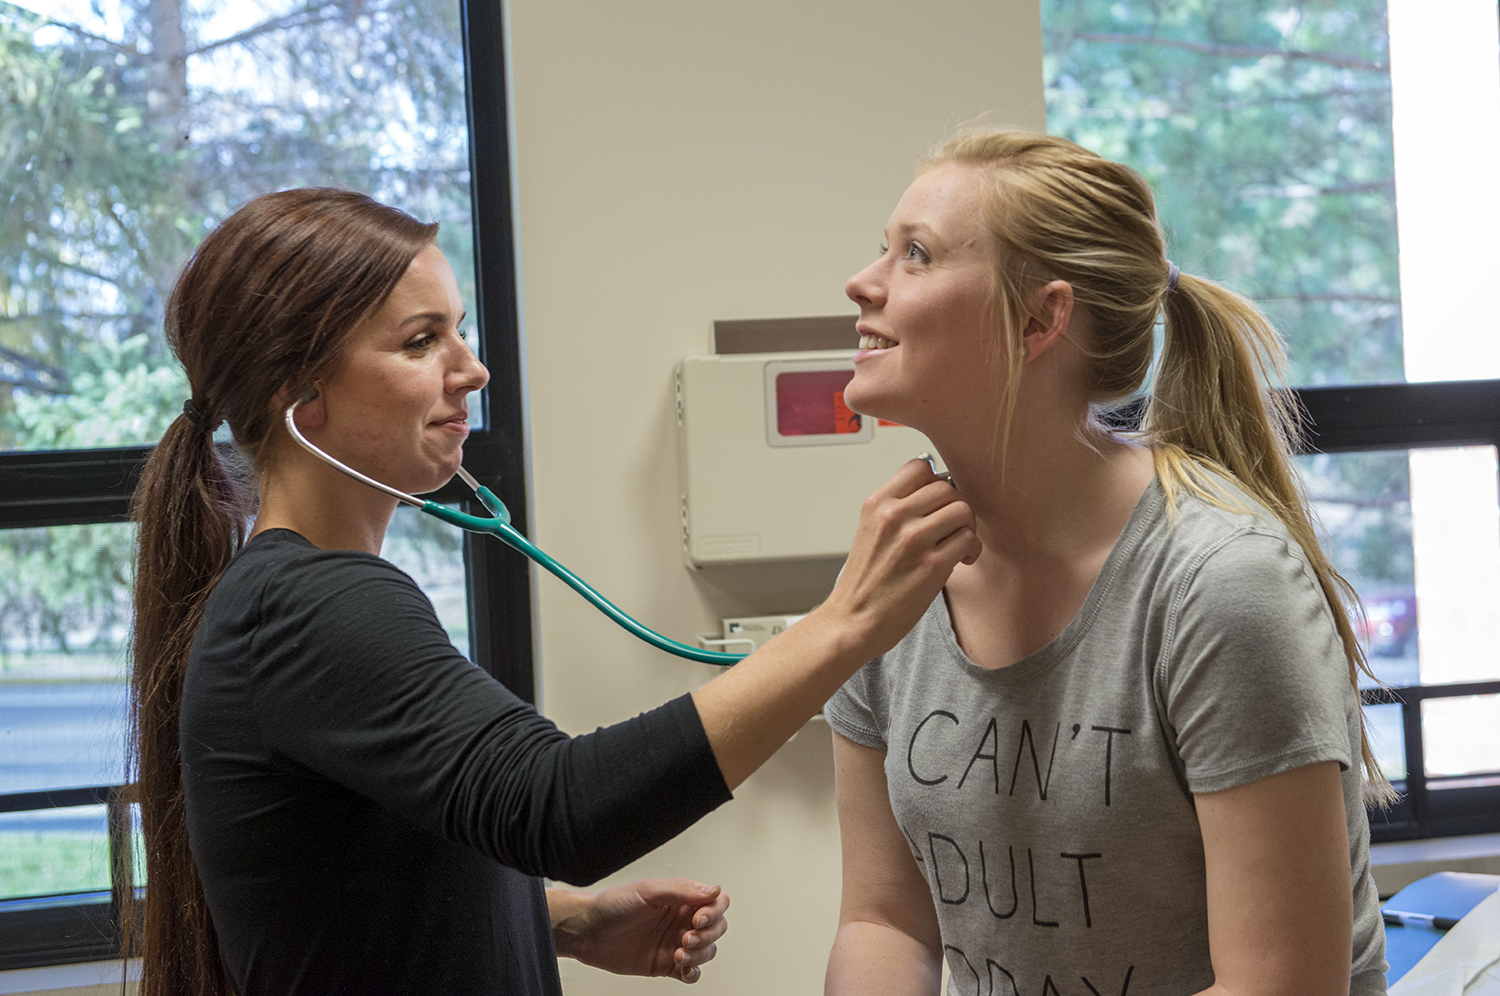 Nursing lab at Bemidji State with one student examining another